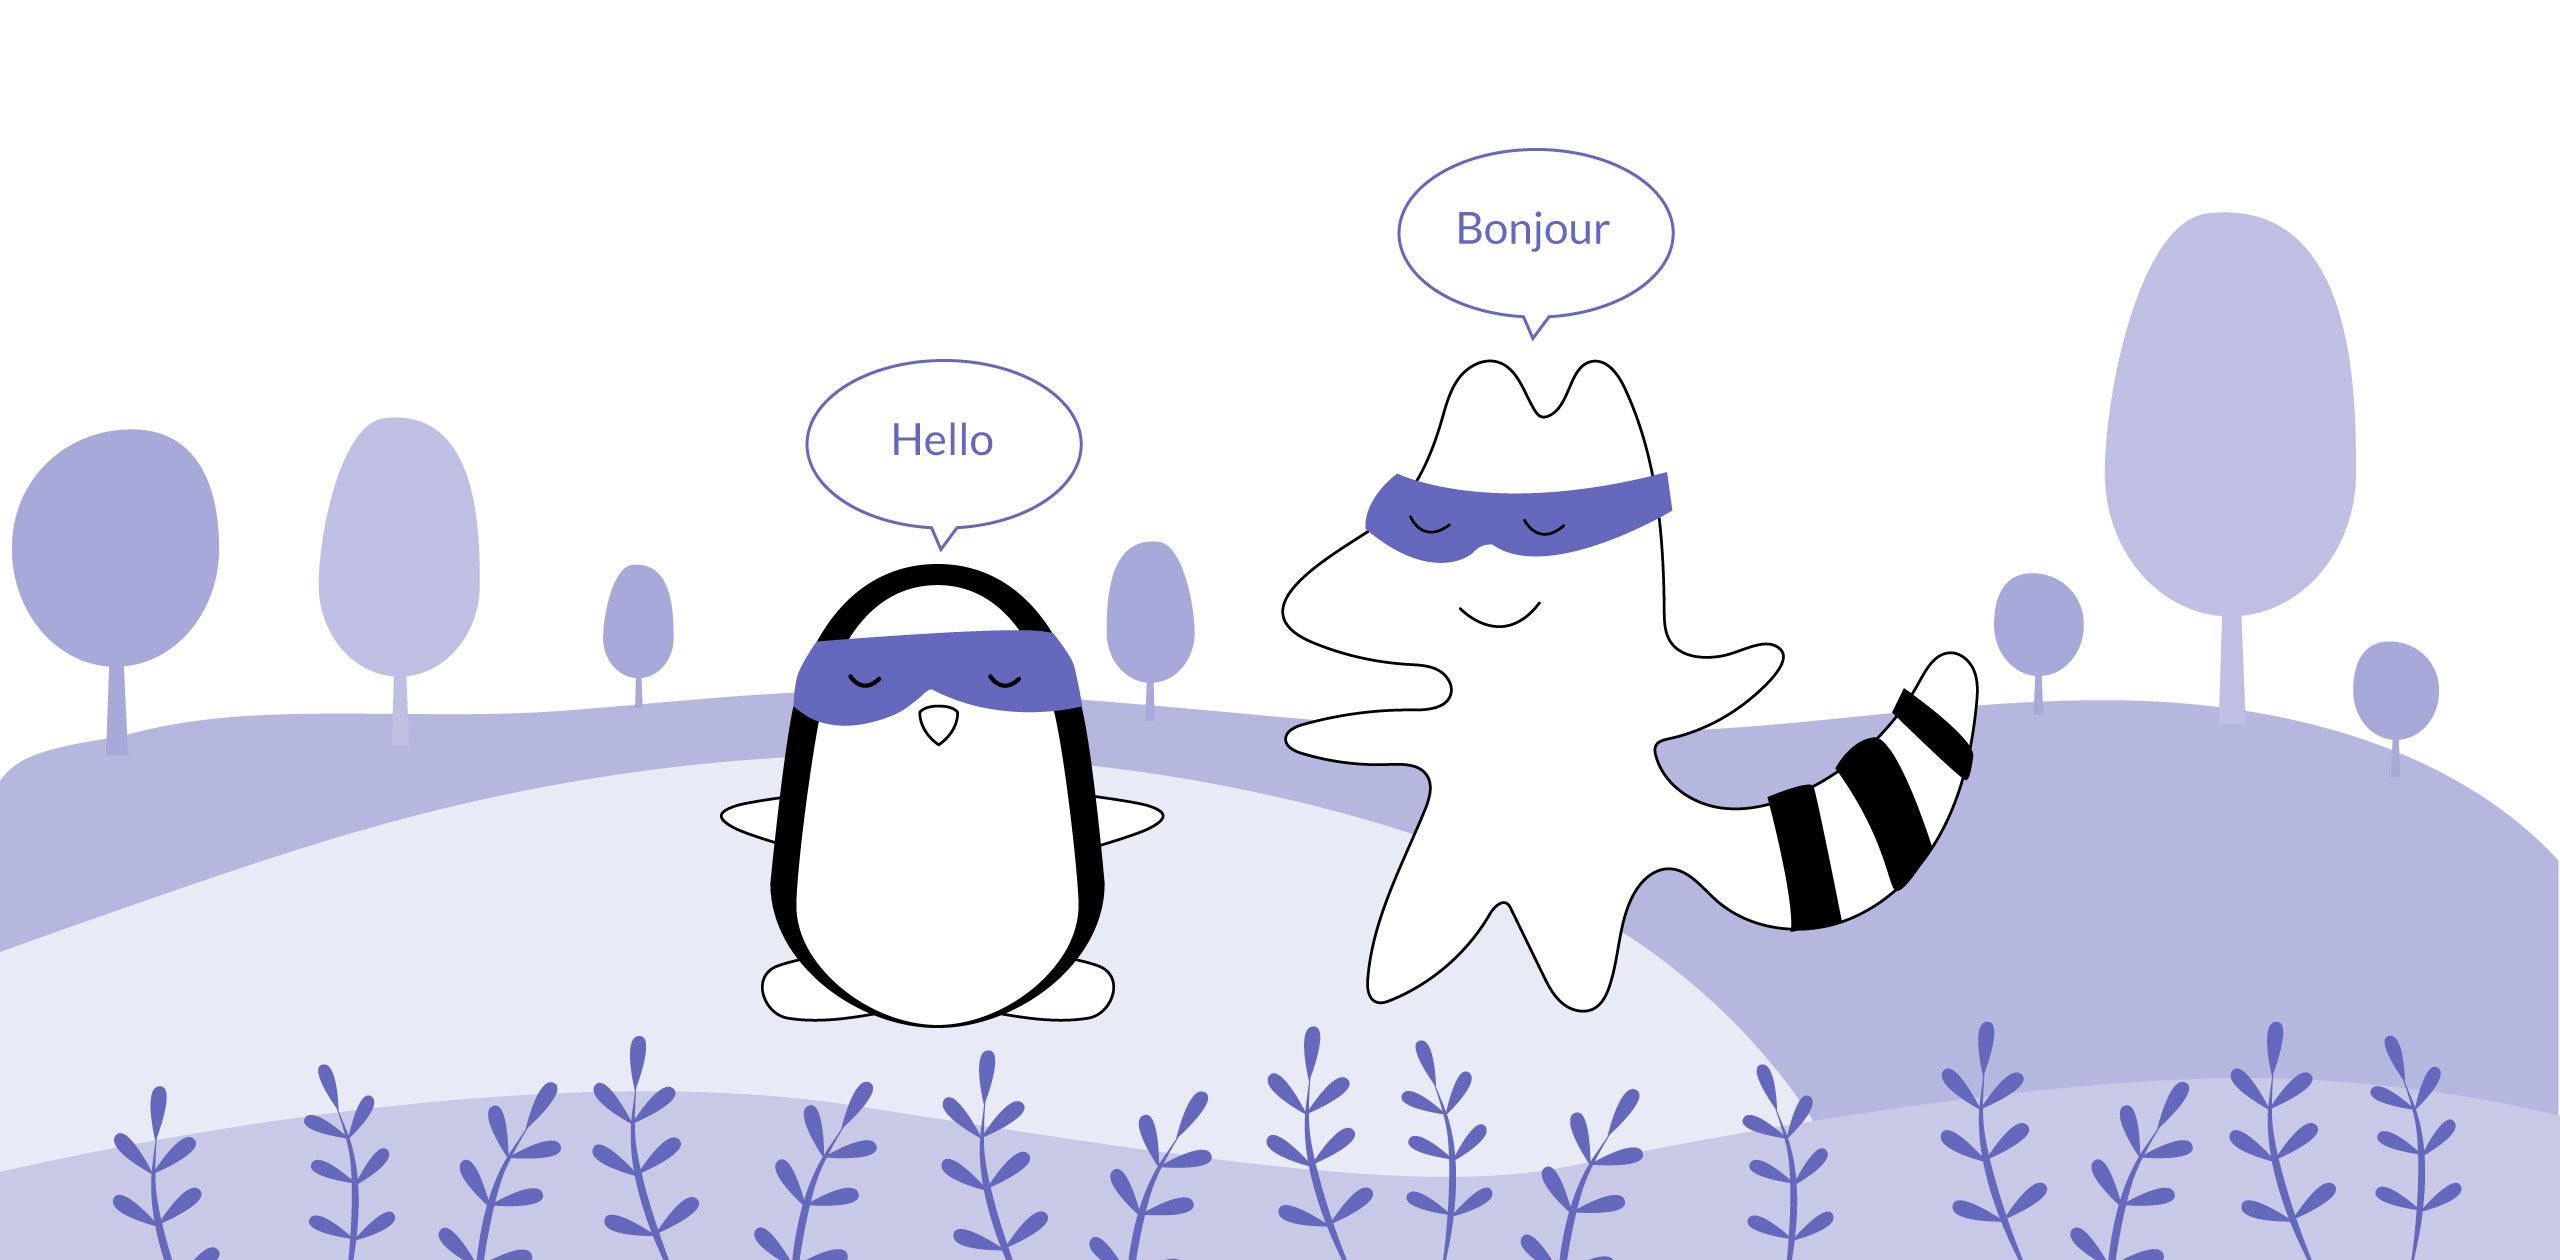 How To Say Hello In French 10 Useful French Greetings With Audio Langster